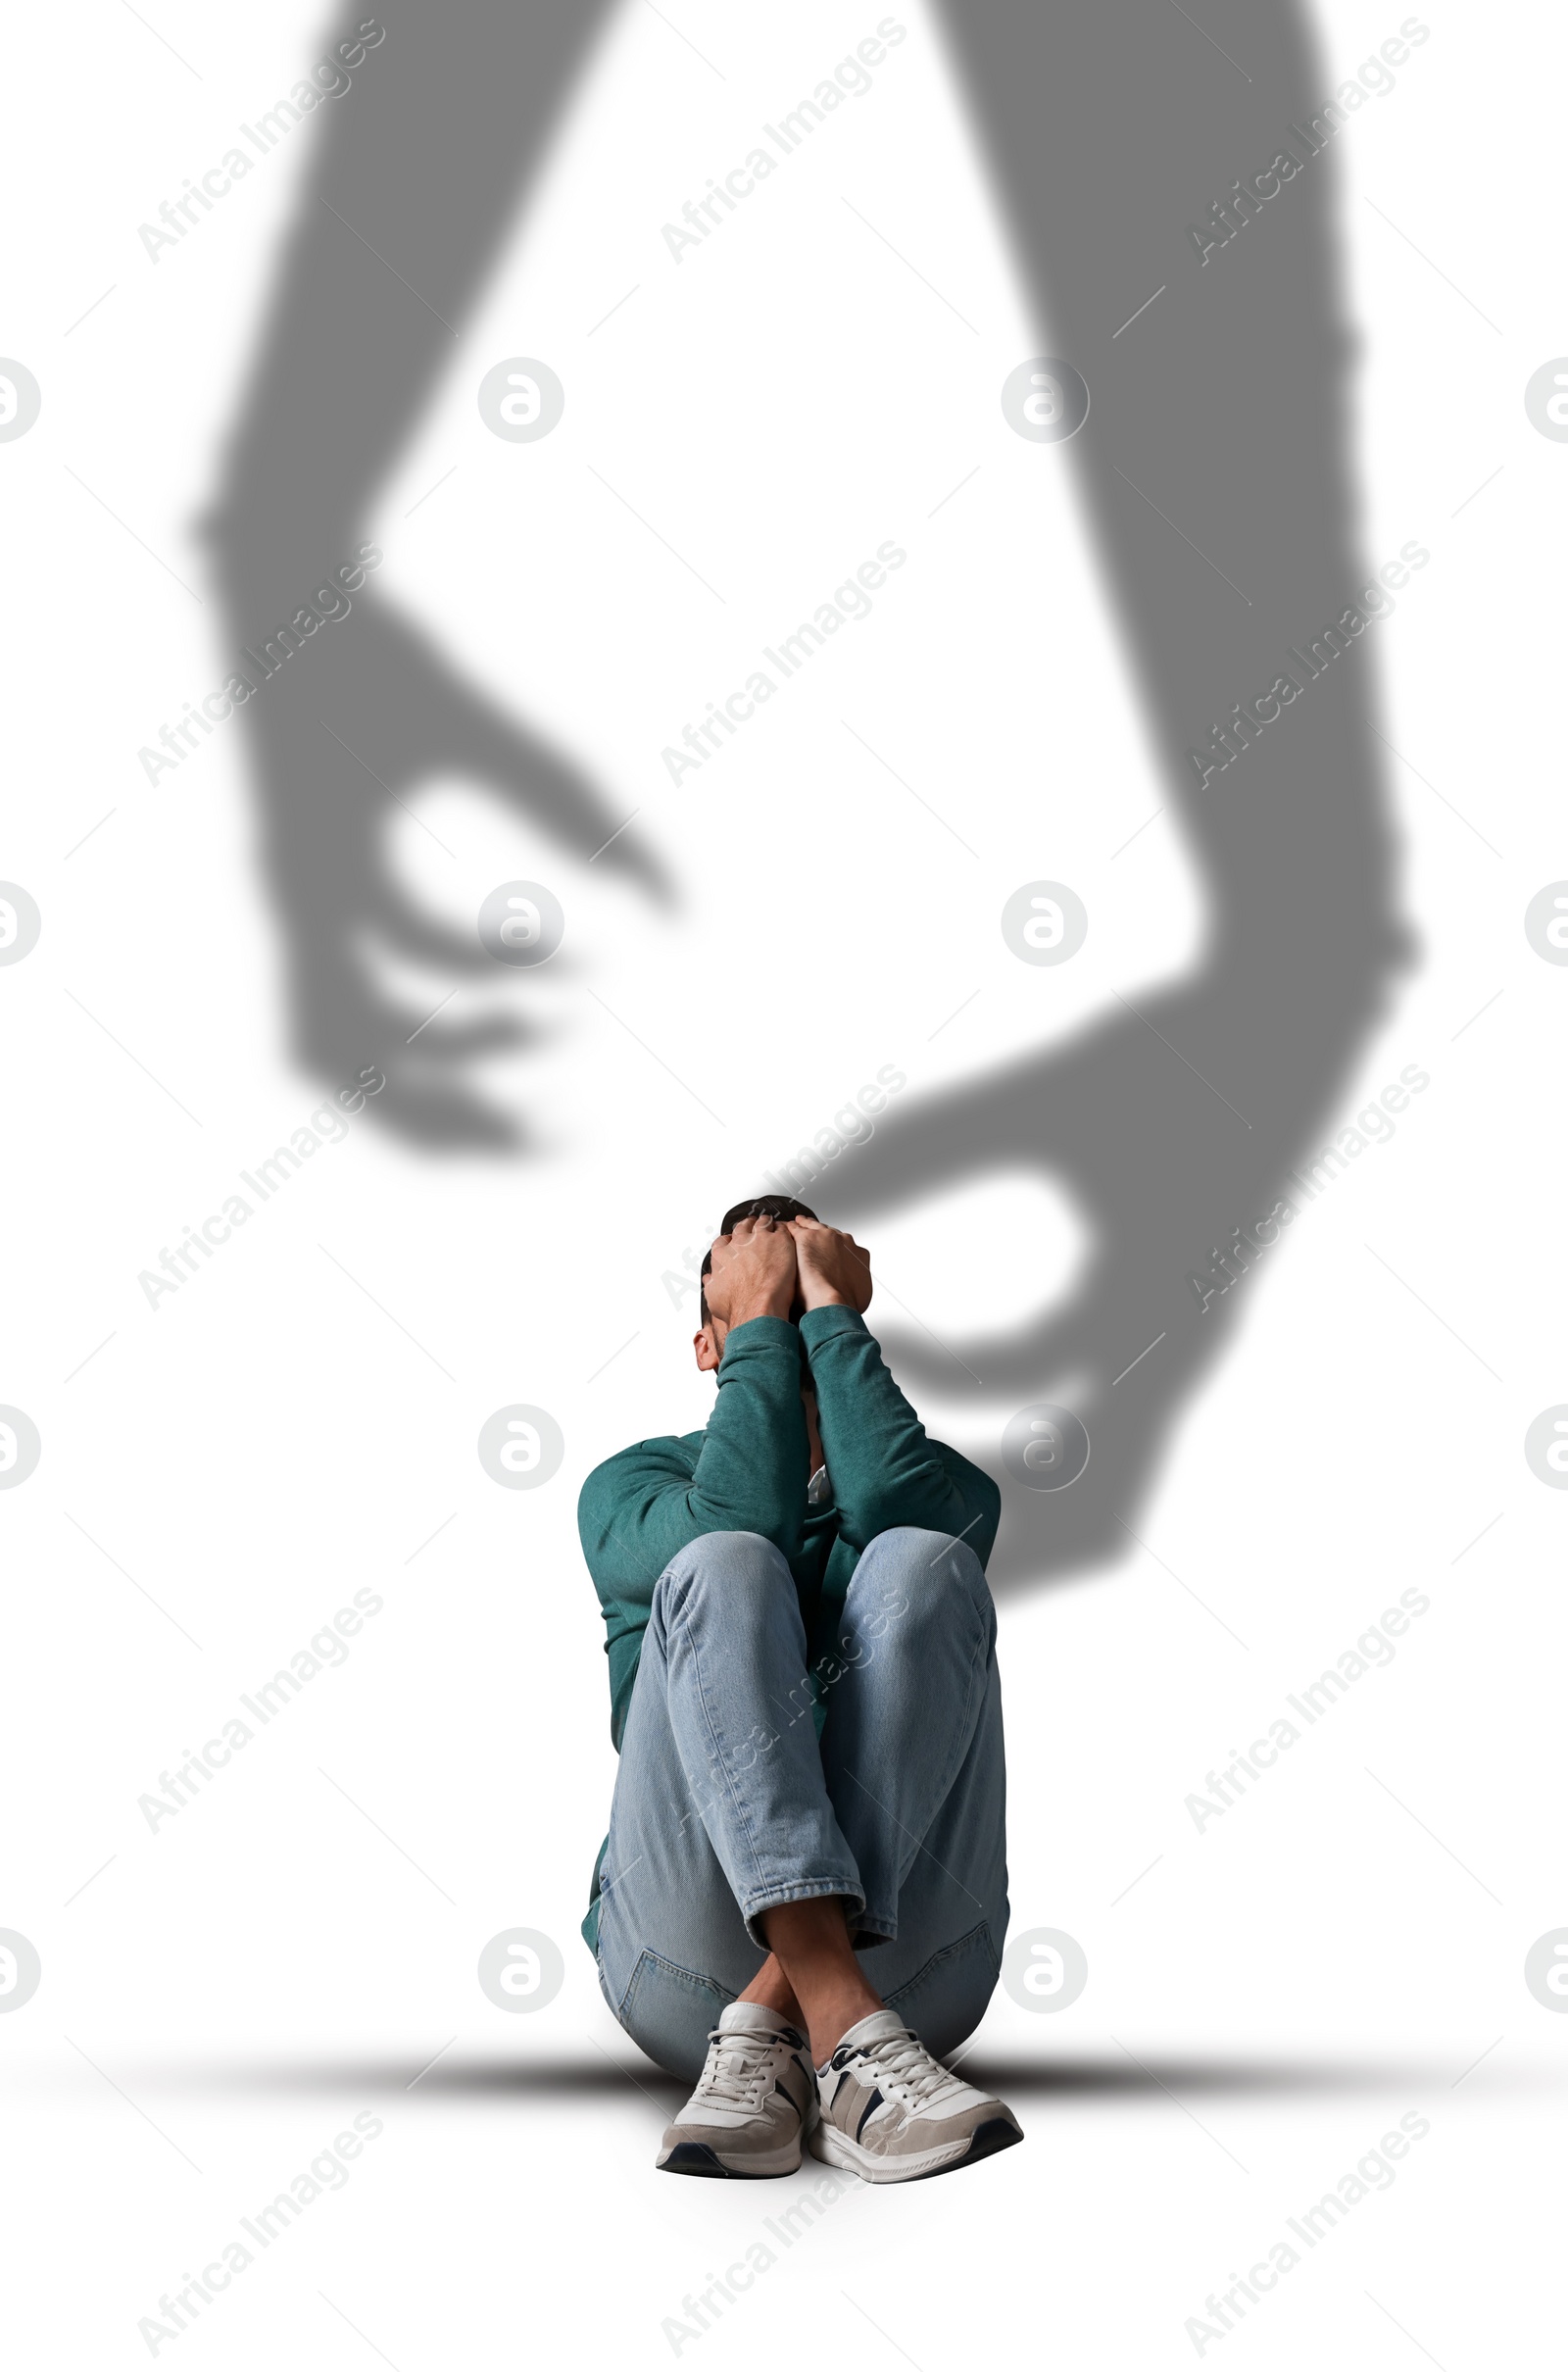 Image of Suffering from hallucinations. Scared man closing eyes because of shadow of monster hands reaching to him